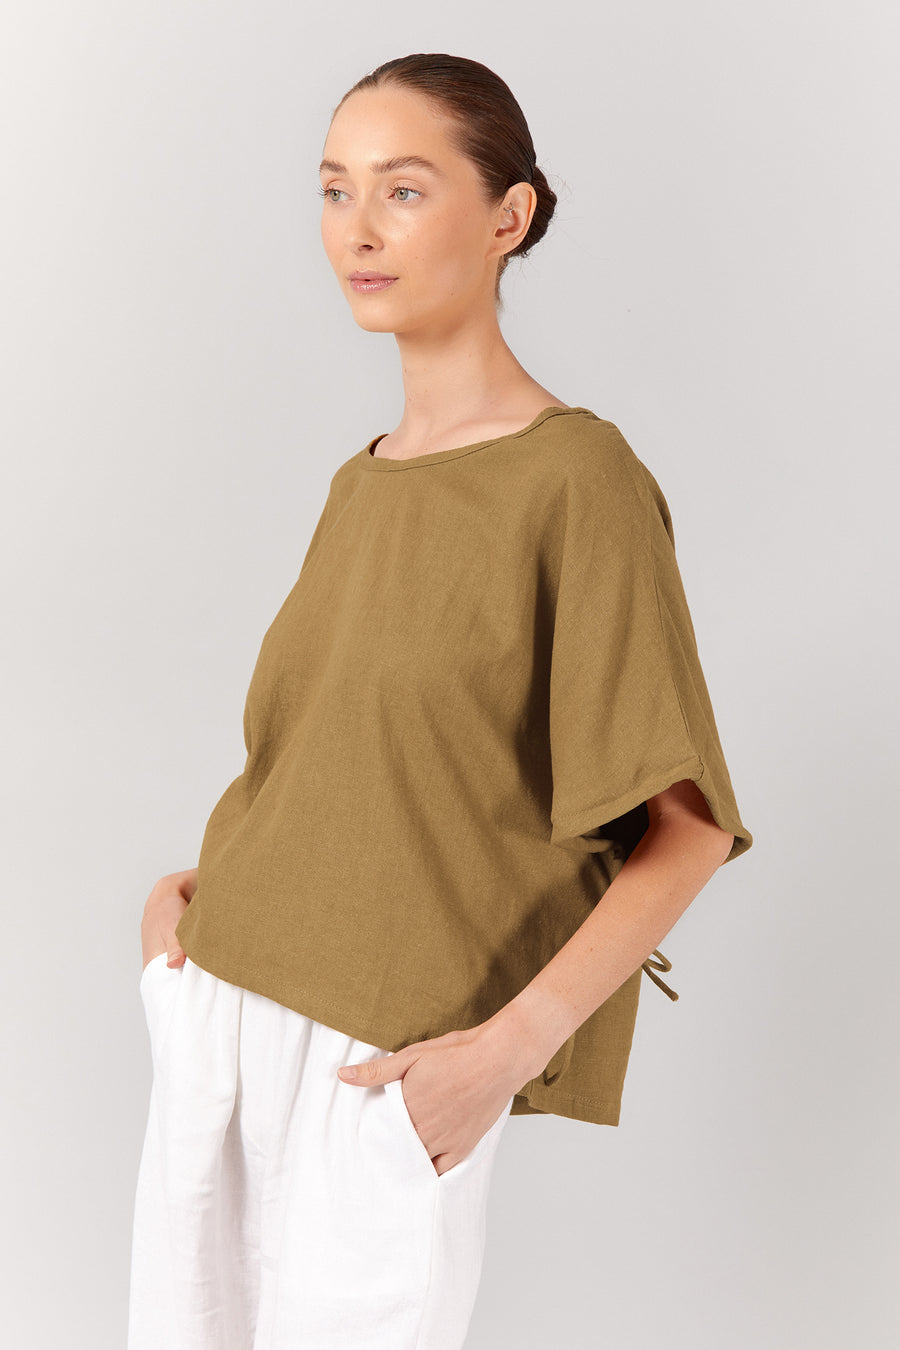 HELEN TOP - TAUPE